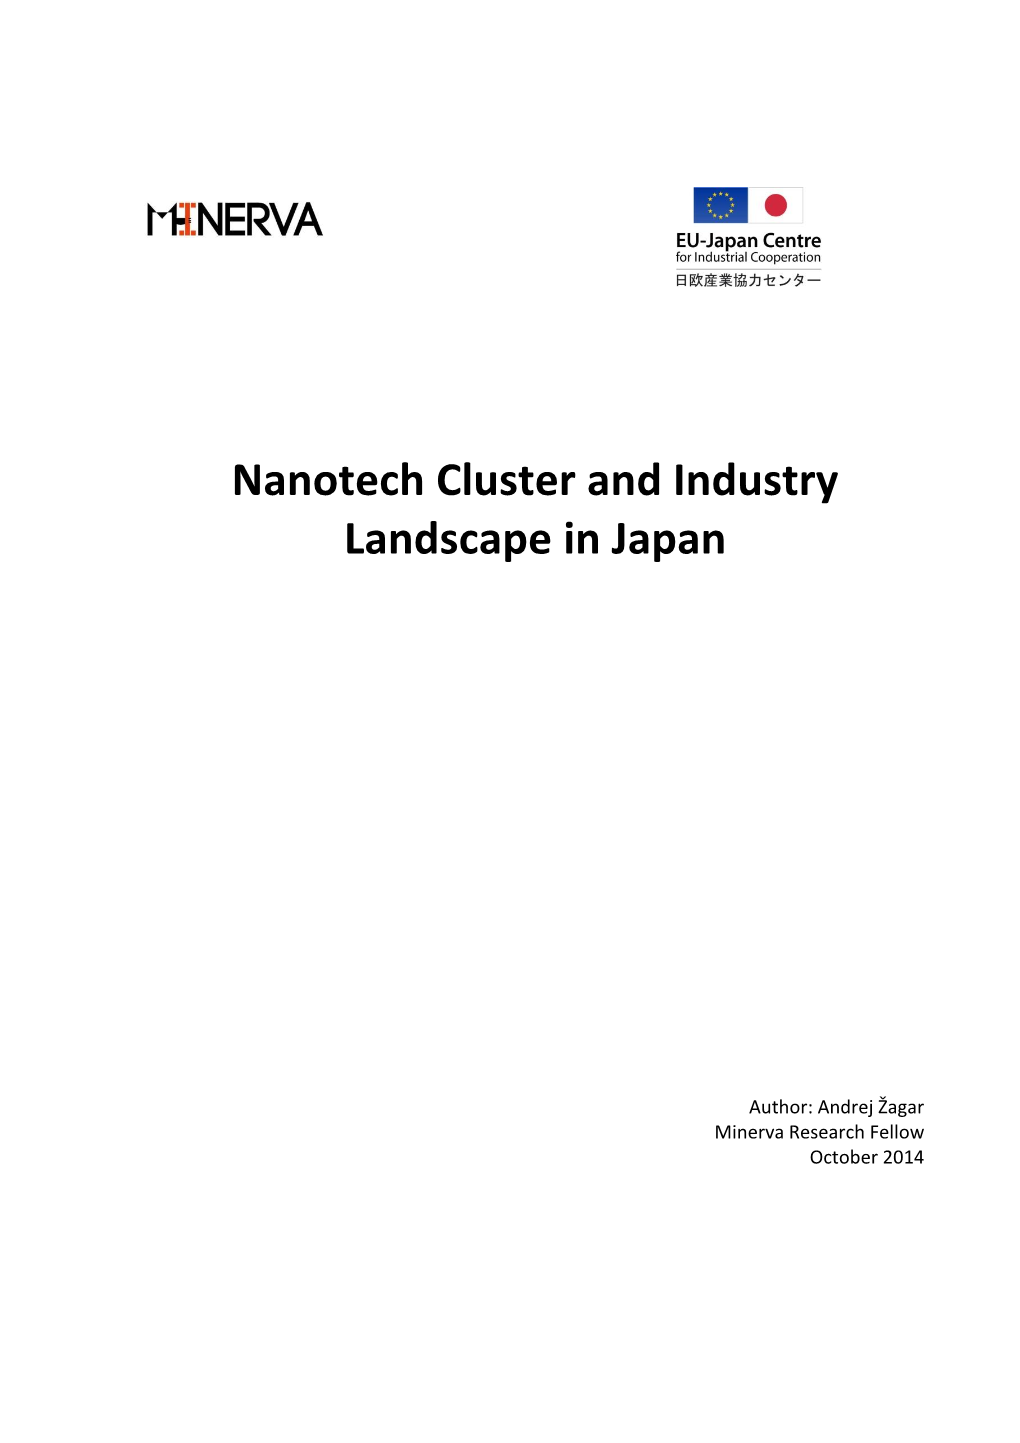 Nanotech Cluster and Industry Landscape in Japan